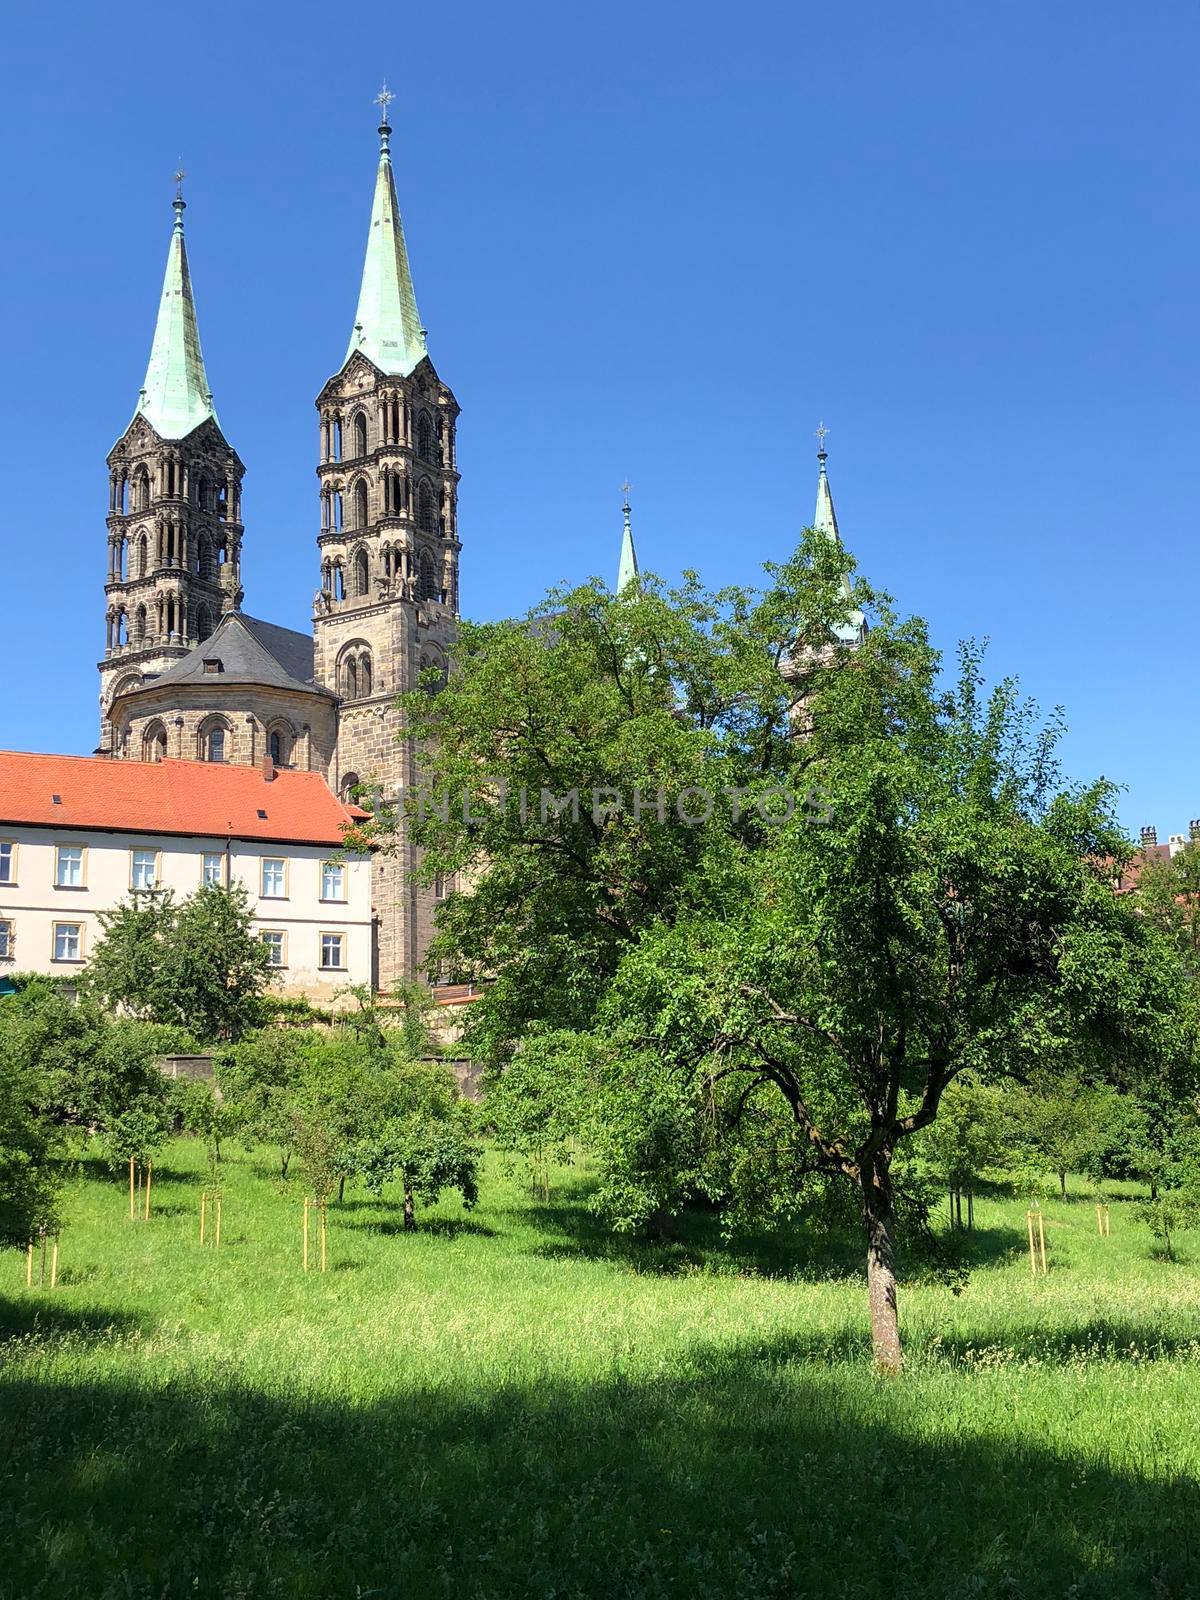 Bamberg Cathedral in Bamberg Germany